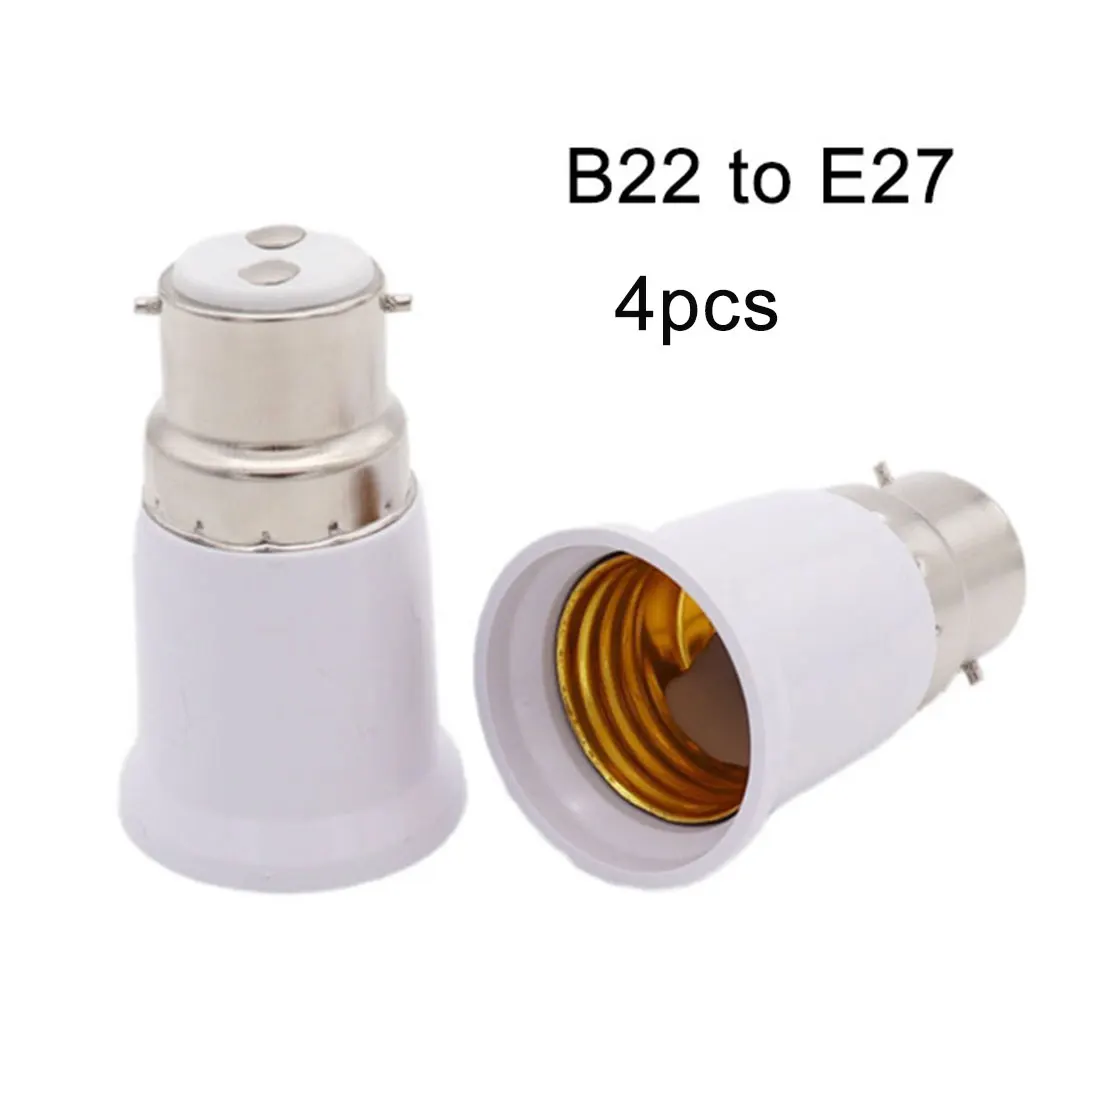 4pcs Pack B22 to E27 Bulb Adapters Bayonet Lamp Base to Screw E26 E27 Bulb Holder Converter Two-Pin Socket to Edison Base extension cord wires lamp holder b22 to e27 lengthened lamp head vintage bayonet to screw shade adapter hanging lantern hanging